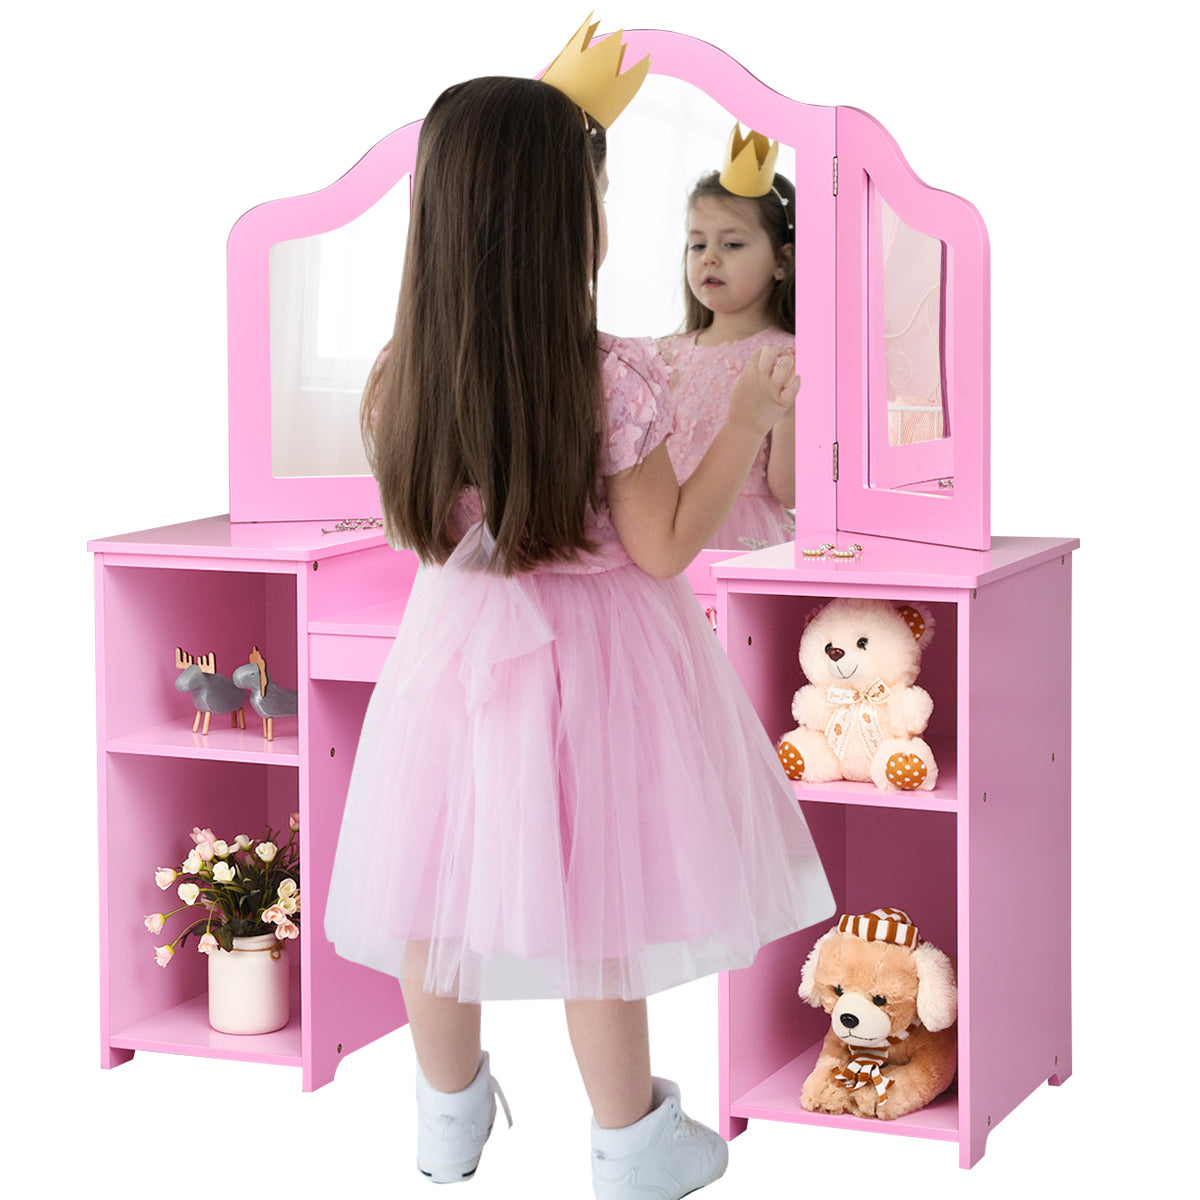 A Great Gift for Kids: The vanity is in small size and designed specifically for children, but it also provides enough space for pretending to play, which is conducive to improving children's hands-on ability and imagination. Every girl wants a beautiful dresser with jewelry and cosmetics. Buy an ideal vanity for your kids!